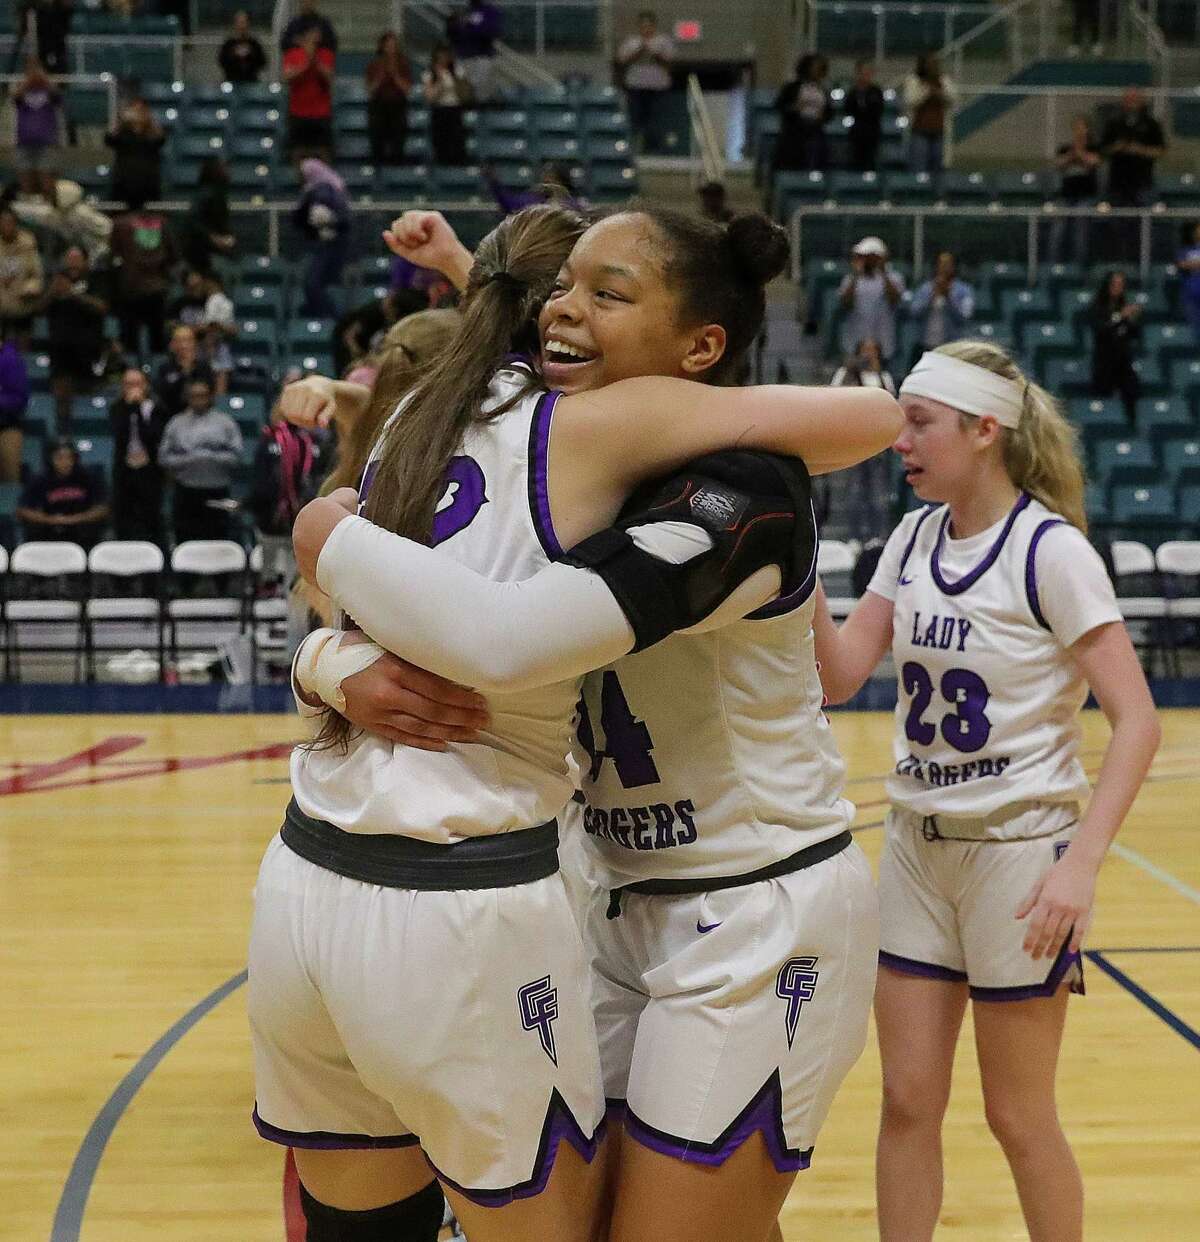 KATY, TX -FEBRUARY 25:Kimora Lopez (24) of Fulshear Chargers of the Fulshear Chargers gives her teammate a hug after winning the Region III-6A championship girls basketball playoff game February 25, 2023 in Katy,Texas.